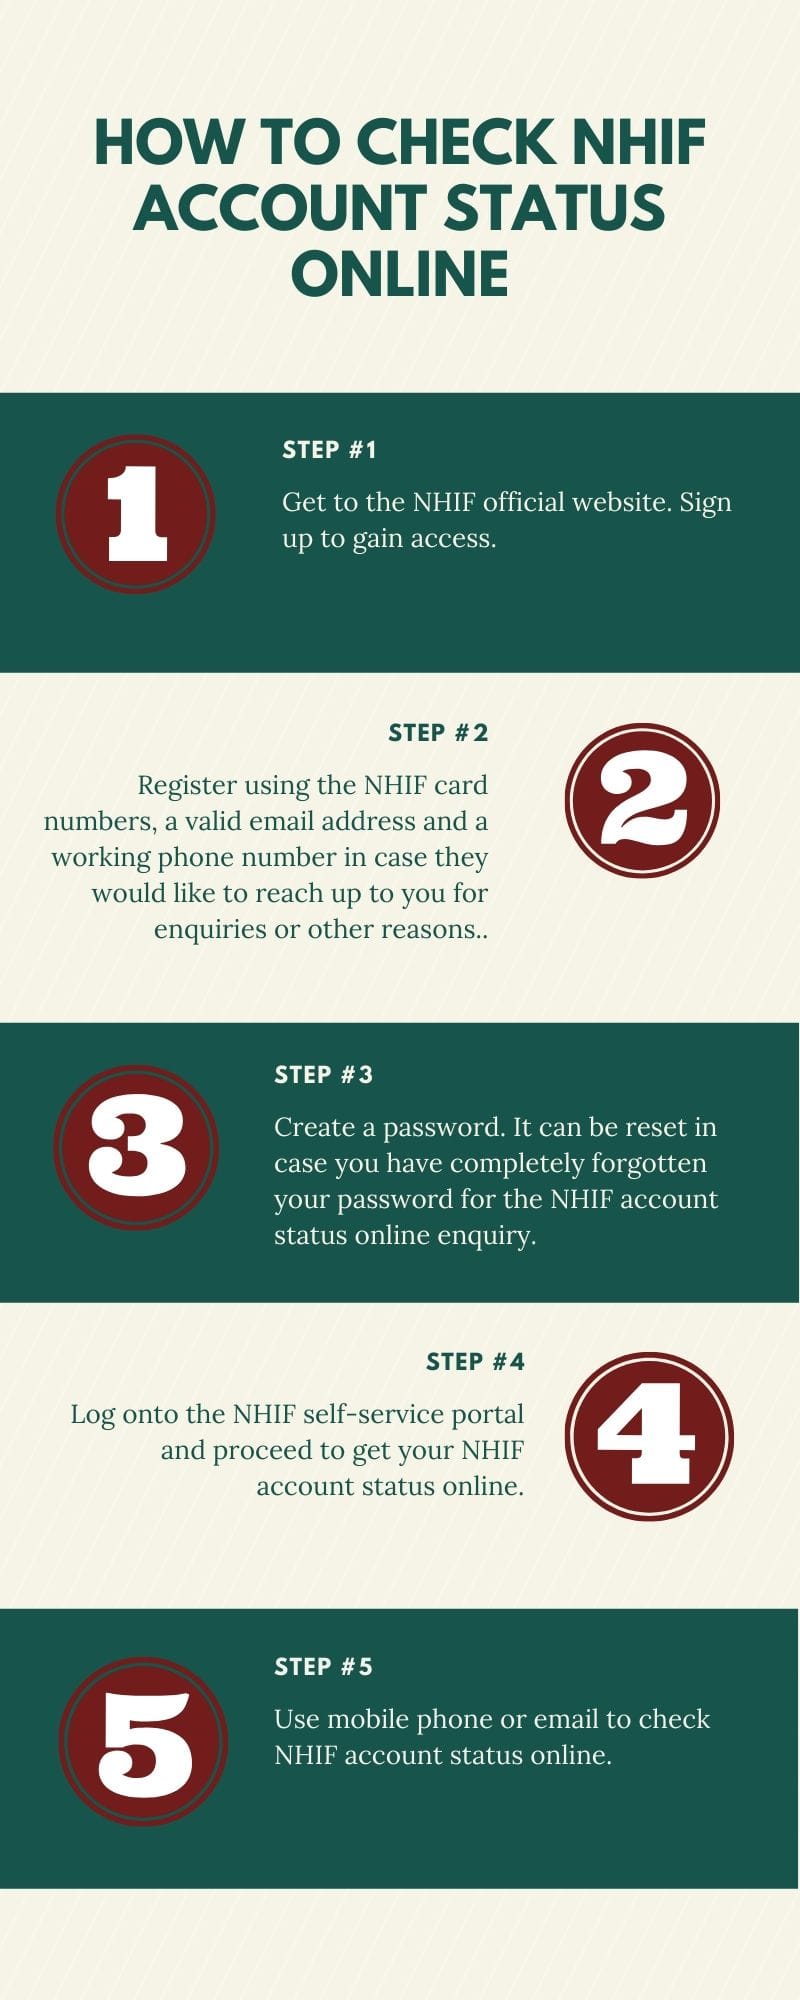 How to check NHIF account status online